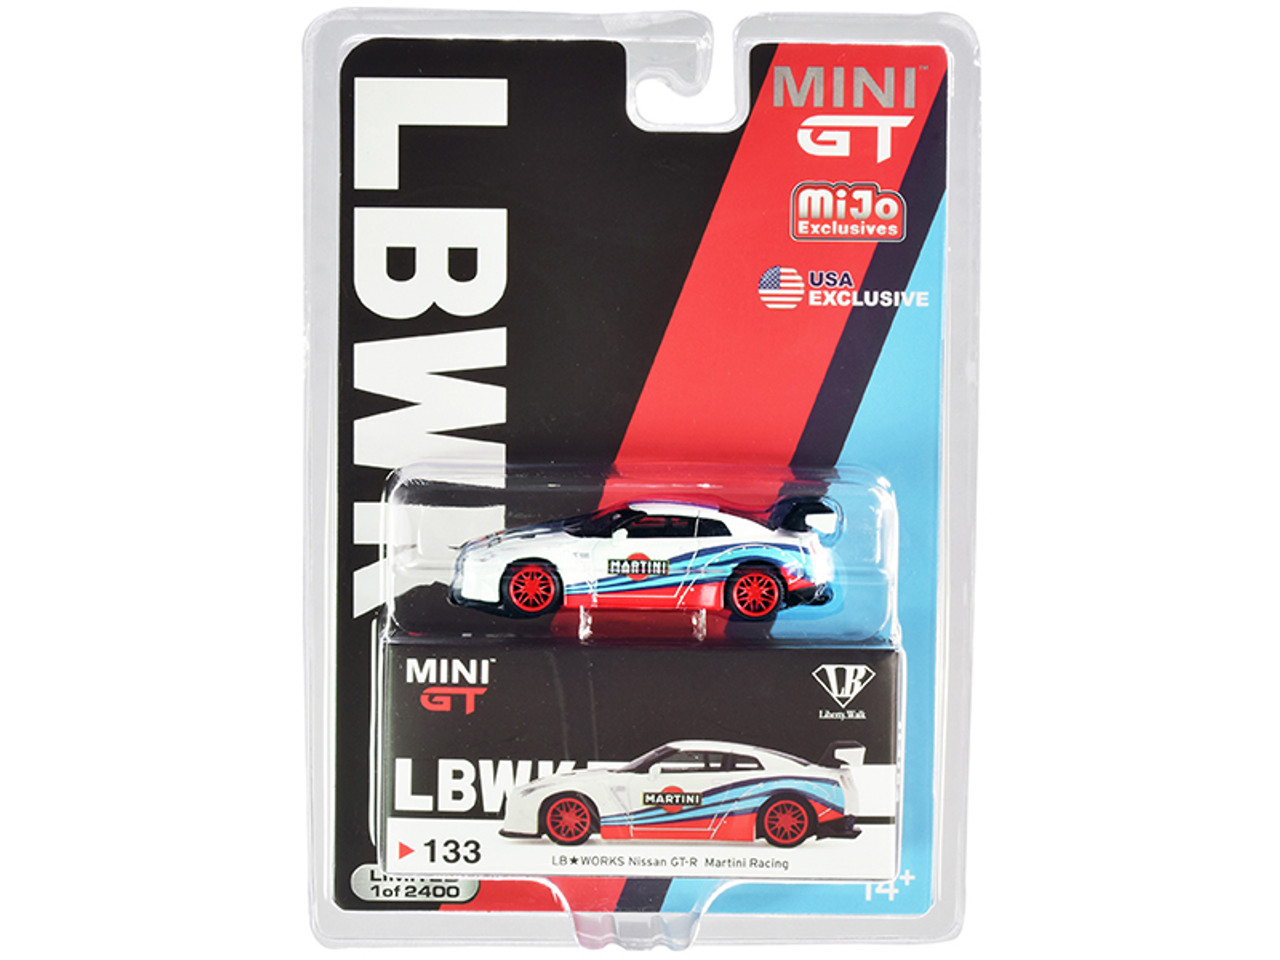 Nissan GT-R (R35) Type 1 LB Works with Rear Wing "Martini Racing" Limited Edition to 2400 pieces Worldwide 1/64 Diecast Model Car by True Scale Miniatures